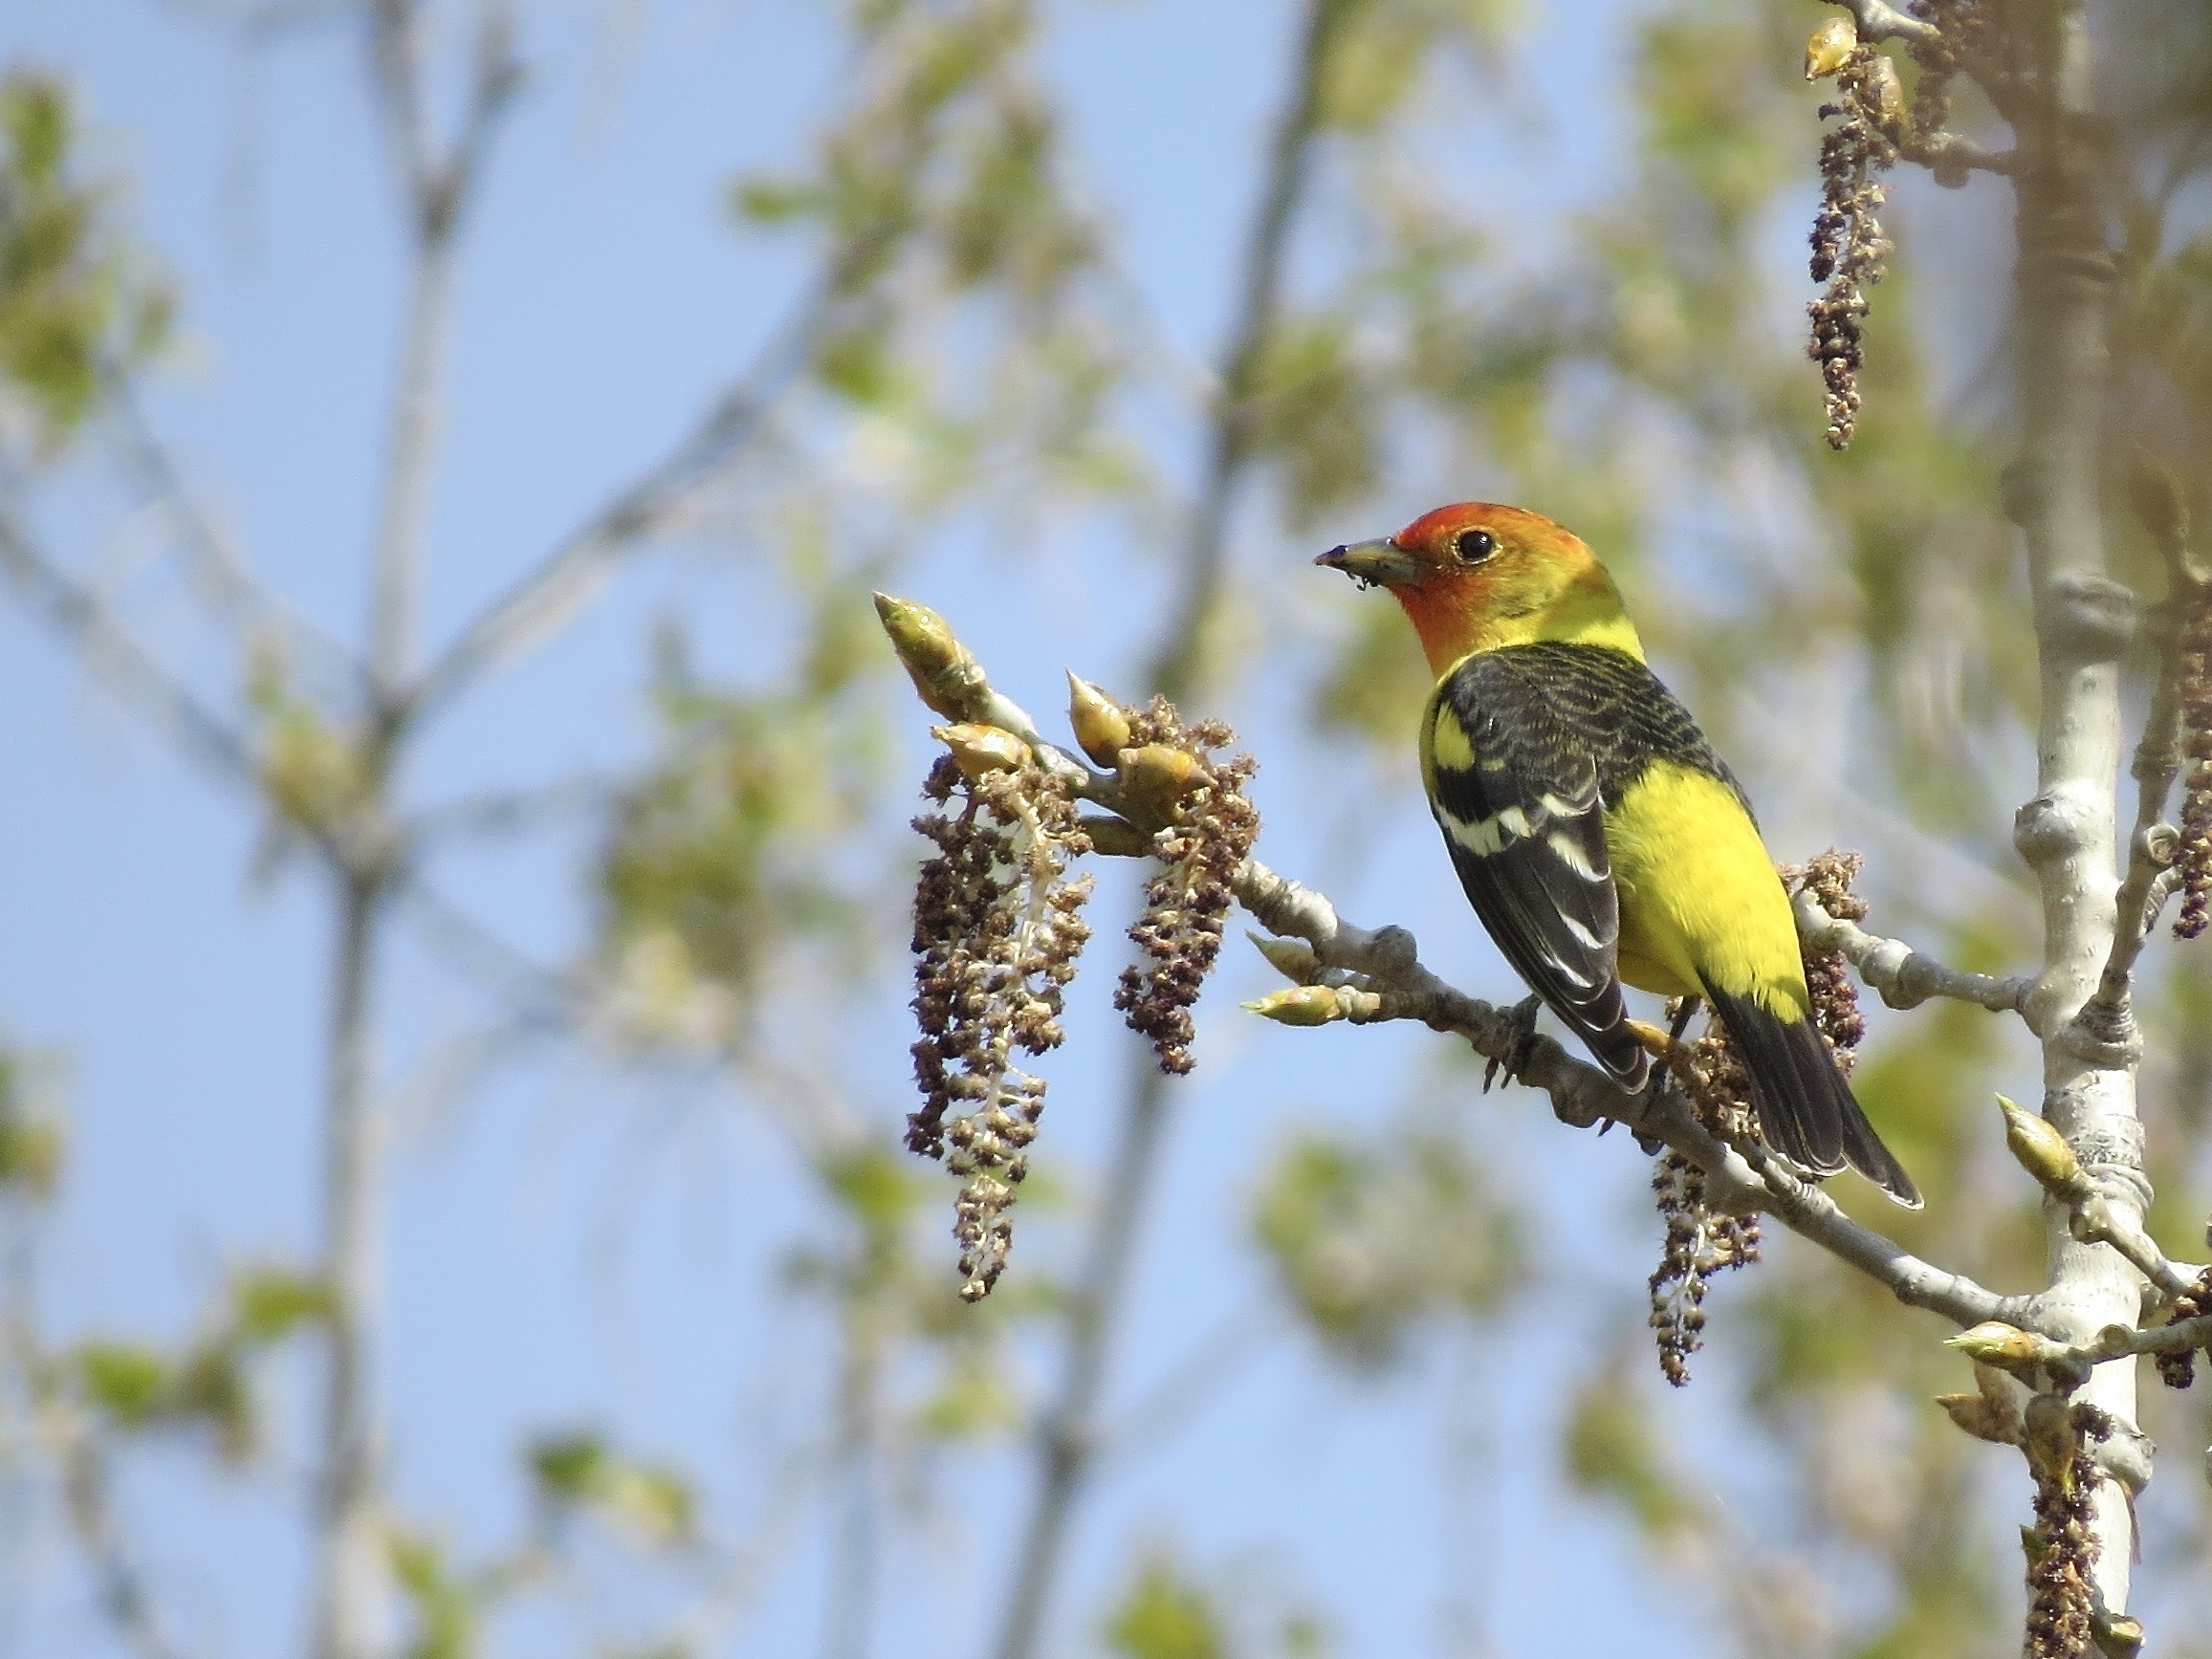 A male Western Tanager on a branch.